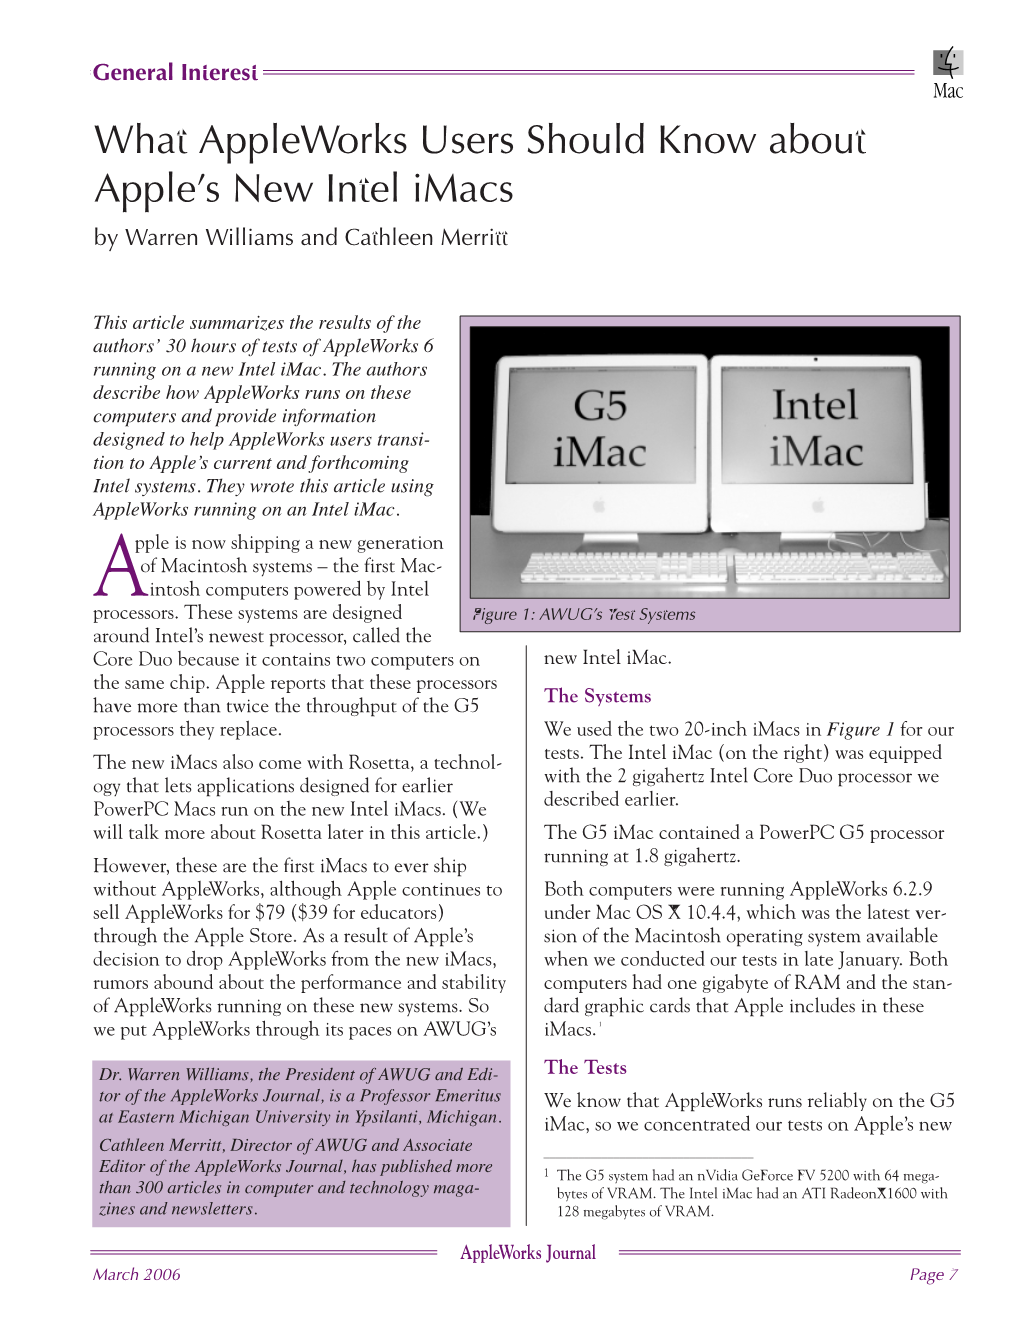 What Appleworks Users Should Know About Apple's New Intel Imacs